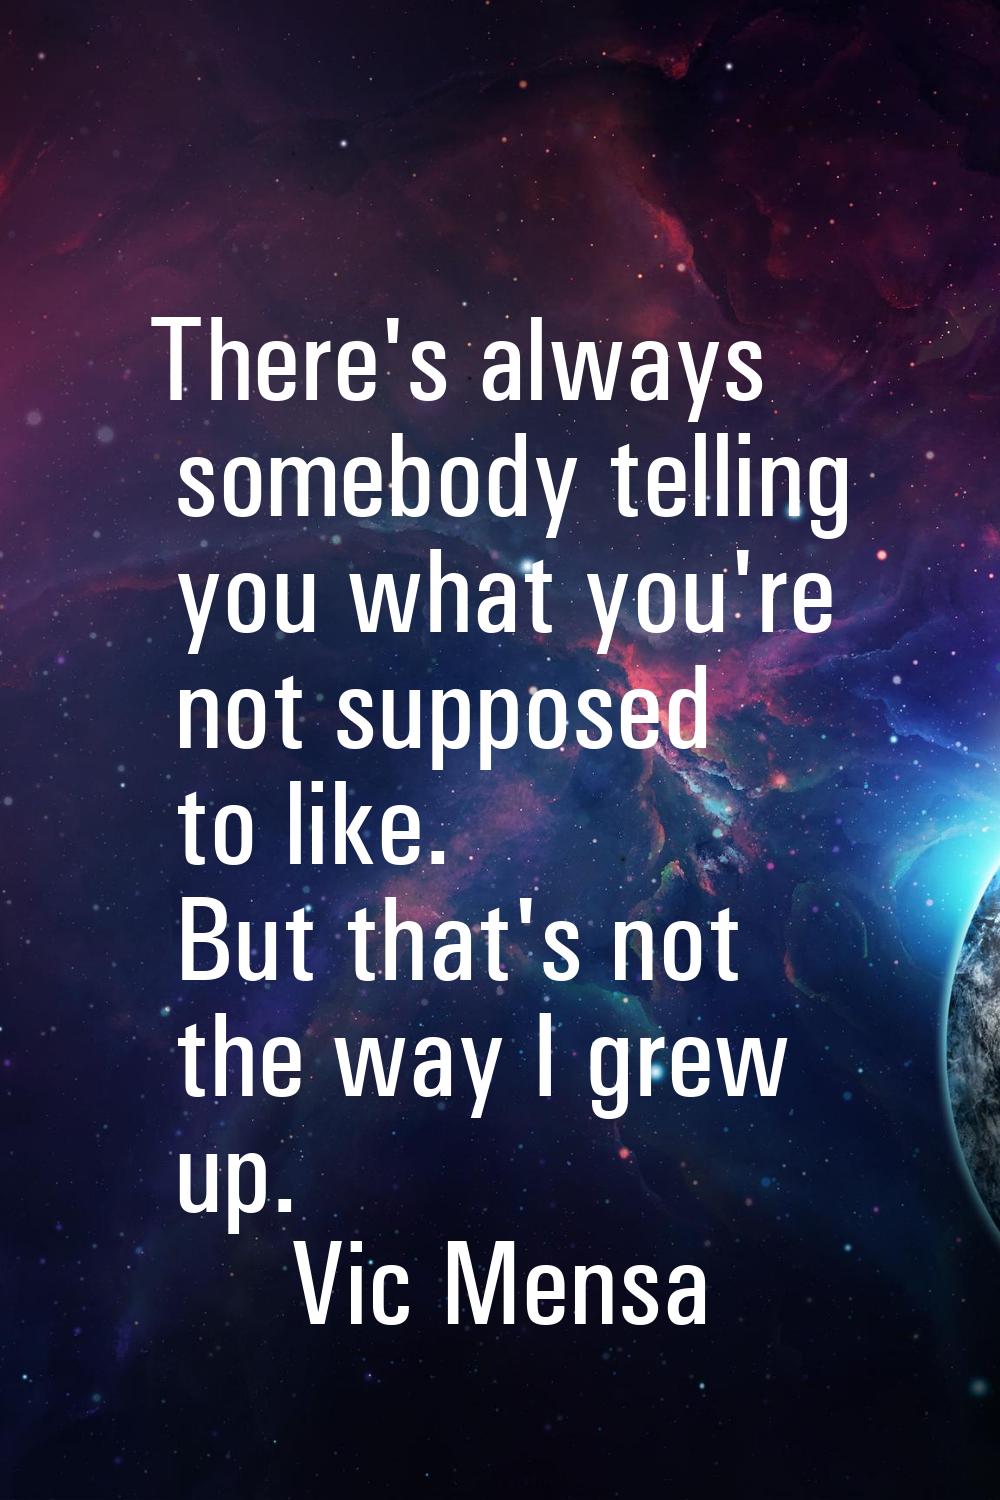 There's always somebody telling you what you're not supposed to like. But that's not the way I grew